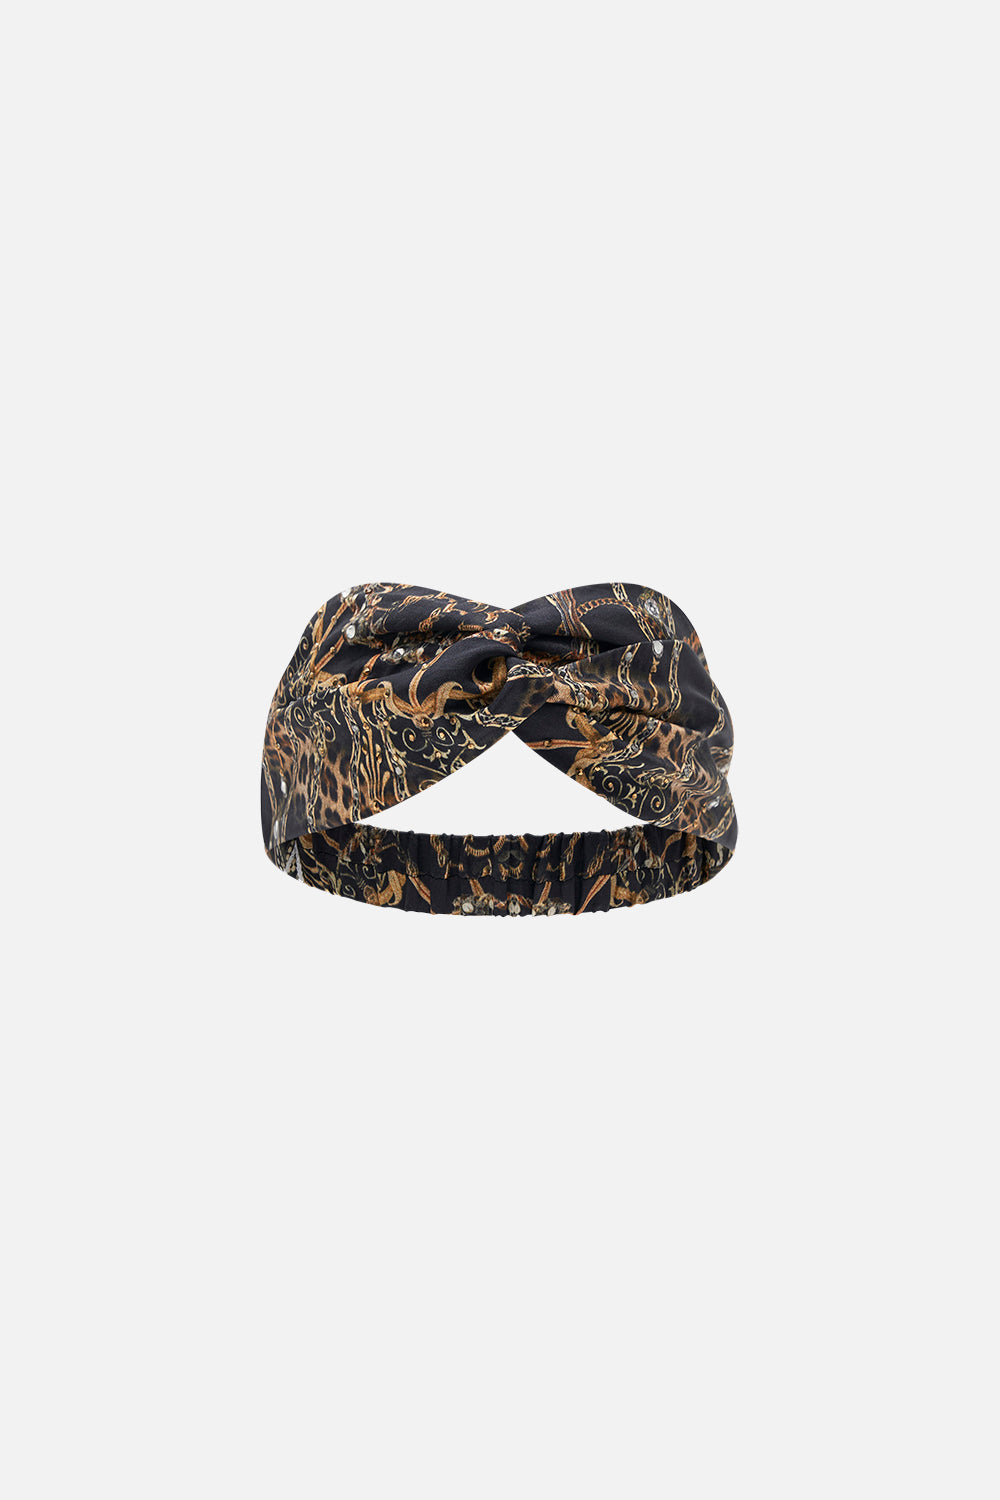 Product view of CAMILLA black and gold silk twist front headband  in Masked at Moonlight print